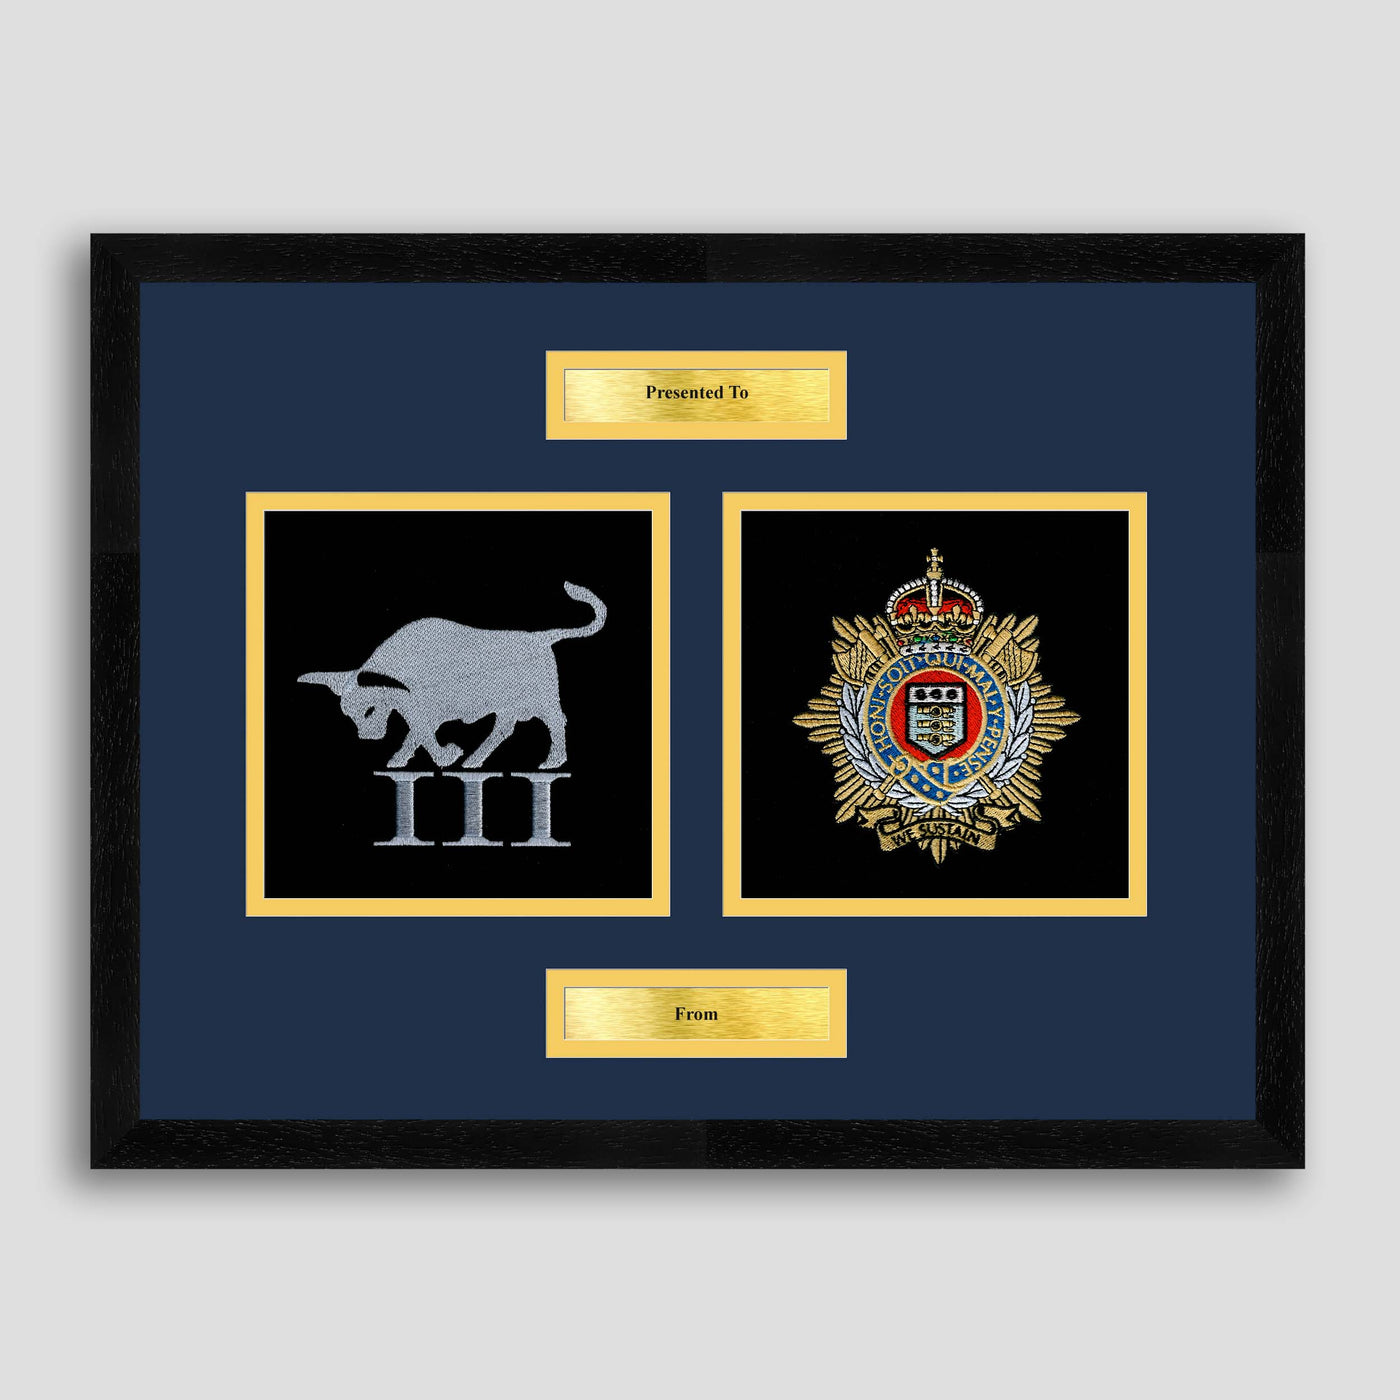 Royal Logistic Corps & 3Bn REME Framed Military Embroidery Presentation